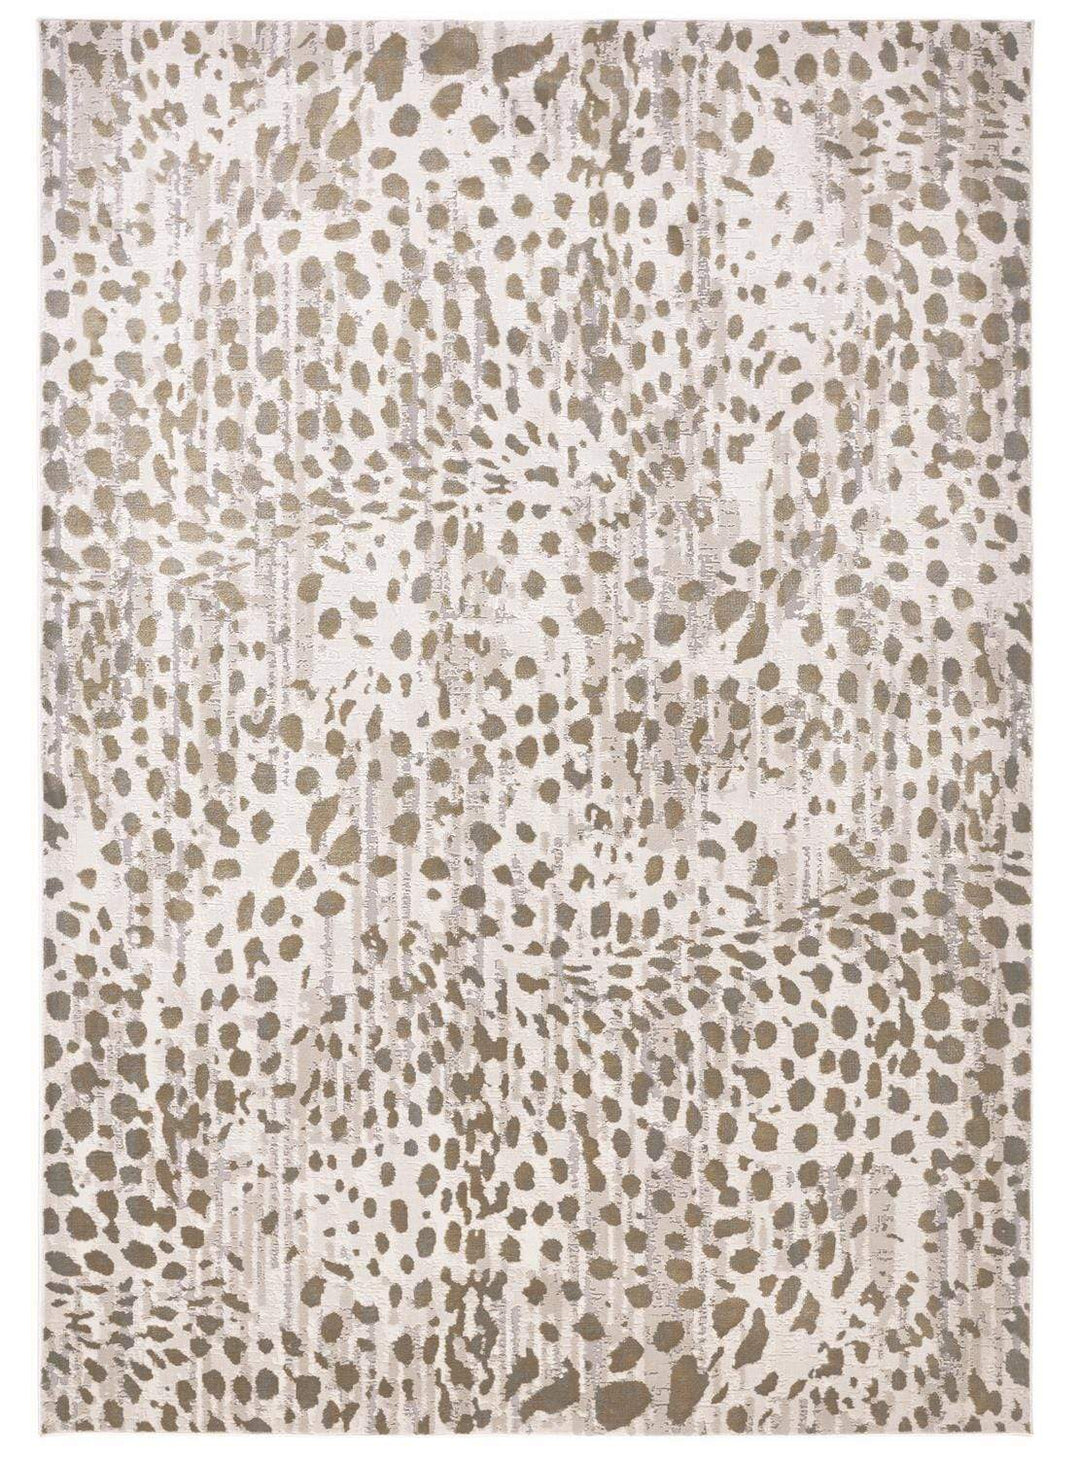 Feizy Feizy Waldor Metallic Animal Print Rug - Available in 7 Sizes - Brown & Ivory 5' x 8' 7353837FBGE000E10